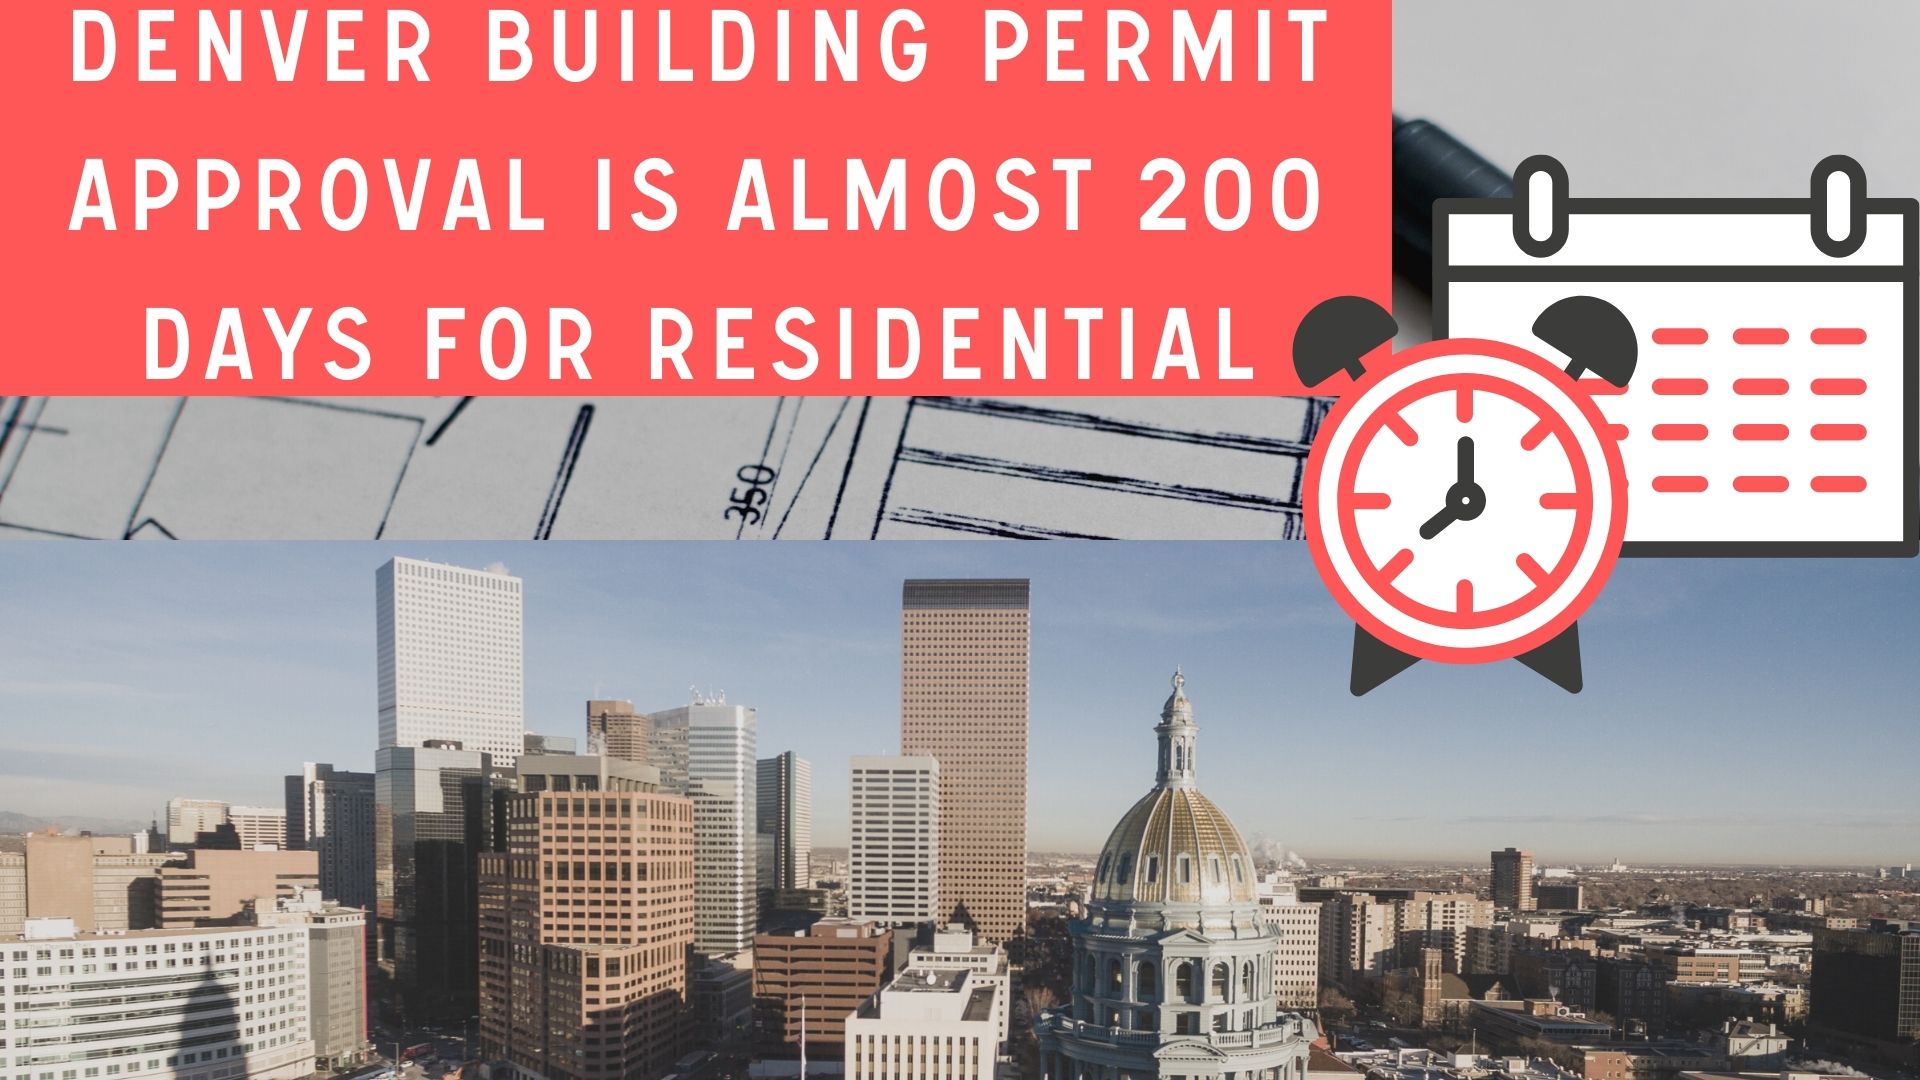 Sustainable Design Build Denver Review Times building permit approval takes almost 200 days